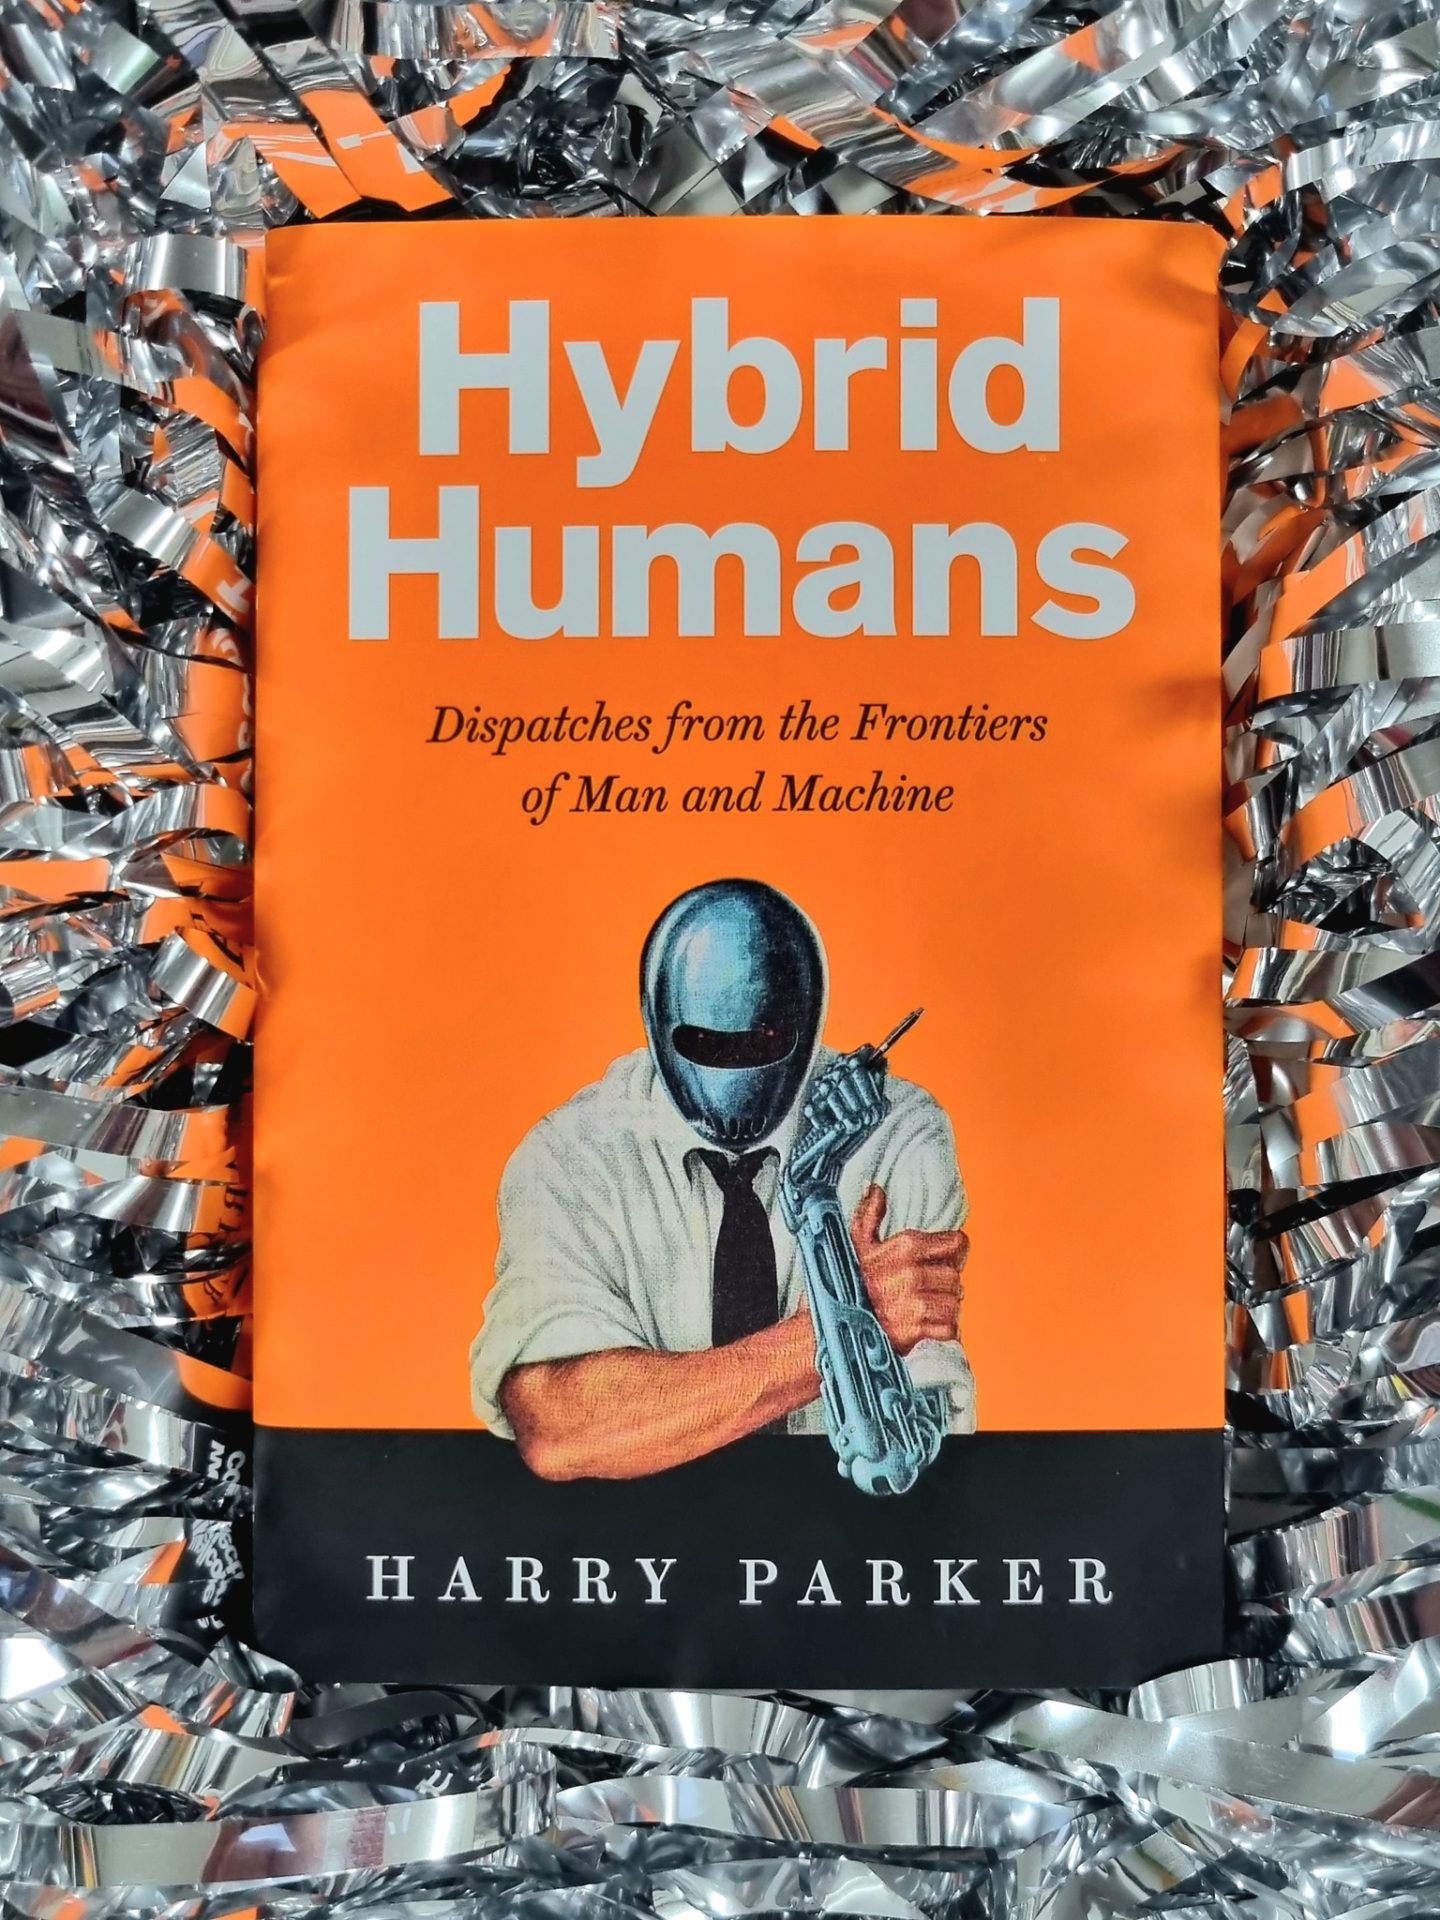 Book cover of Hybrid Humans by Harry Parker